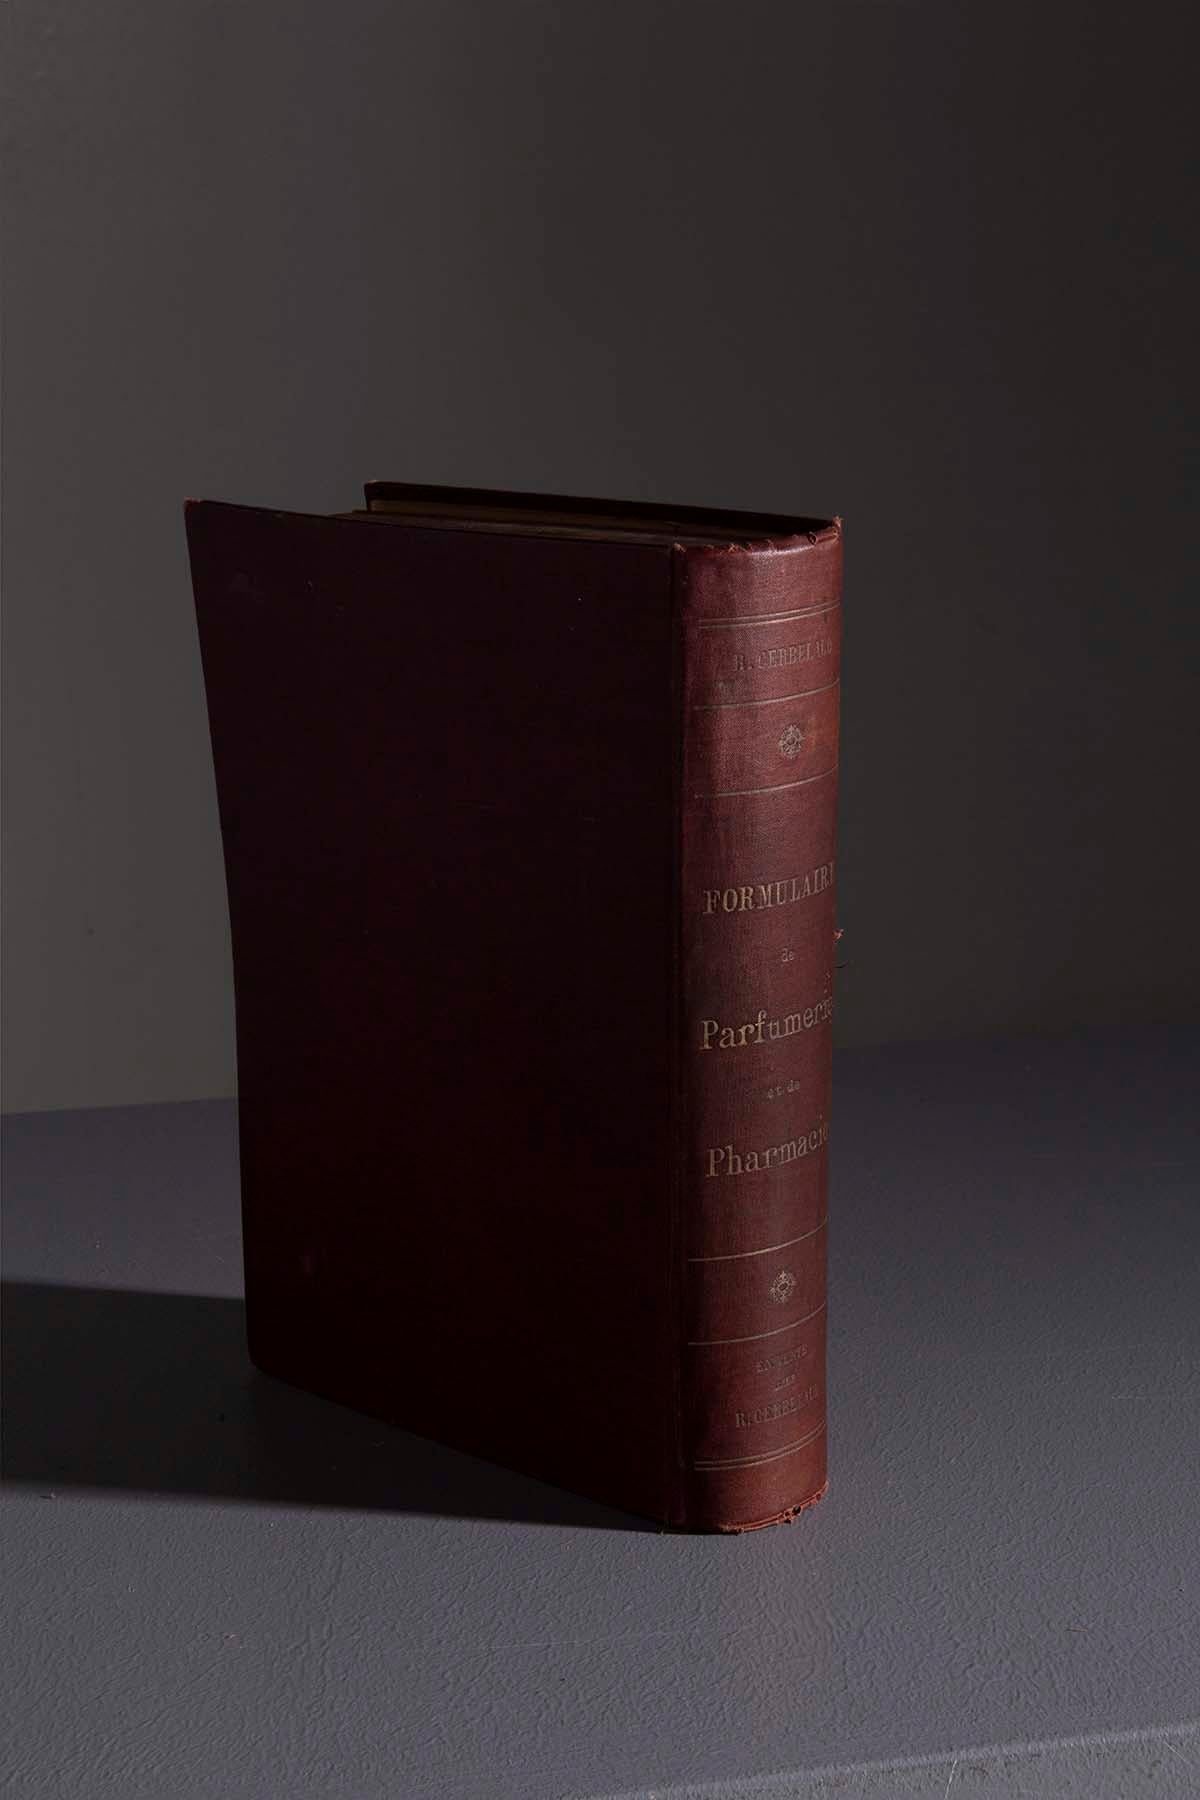 We invite you to embark on a timeless journey of discovery, as we unveil a genuine relic from the past: René Cerbelaud's rare book, dating back to 1909. Titled 